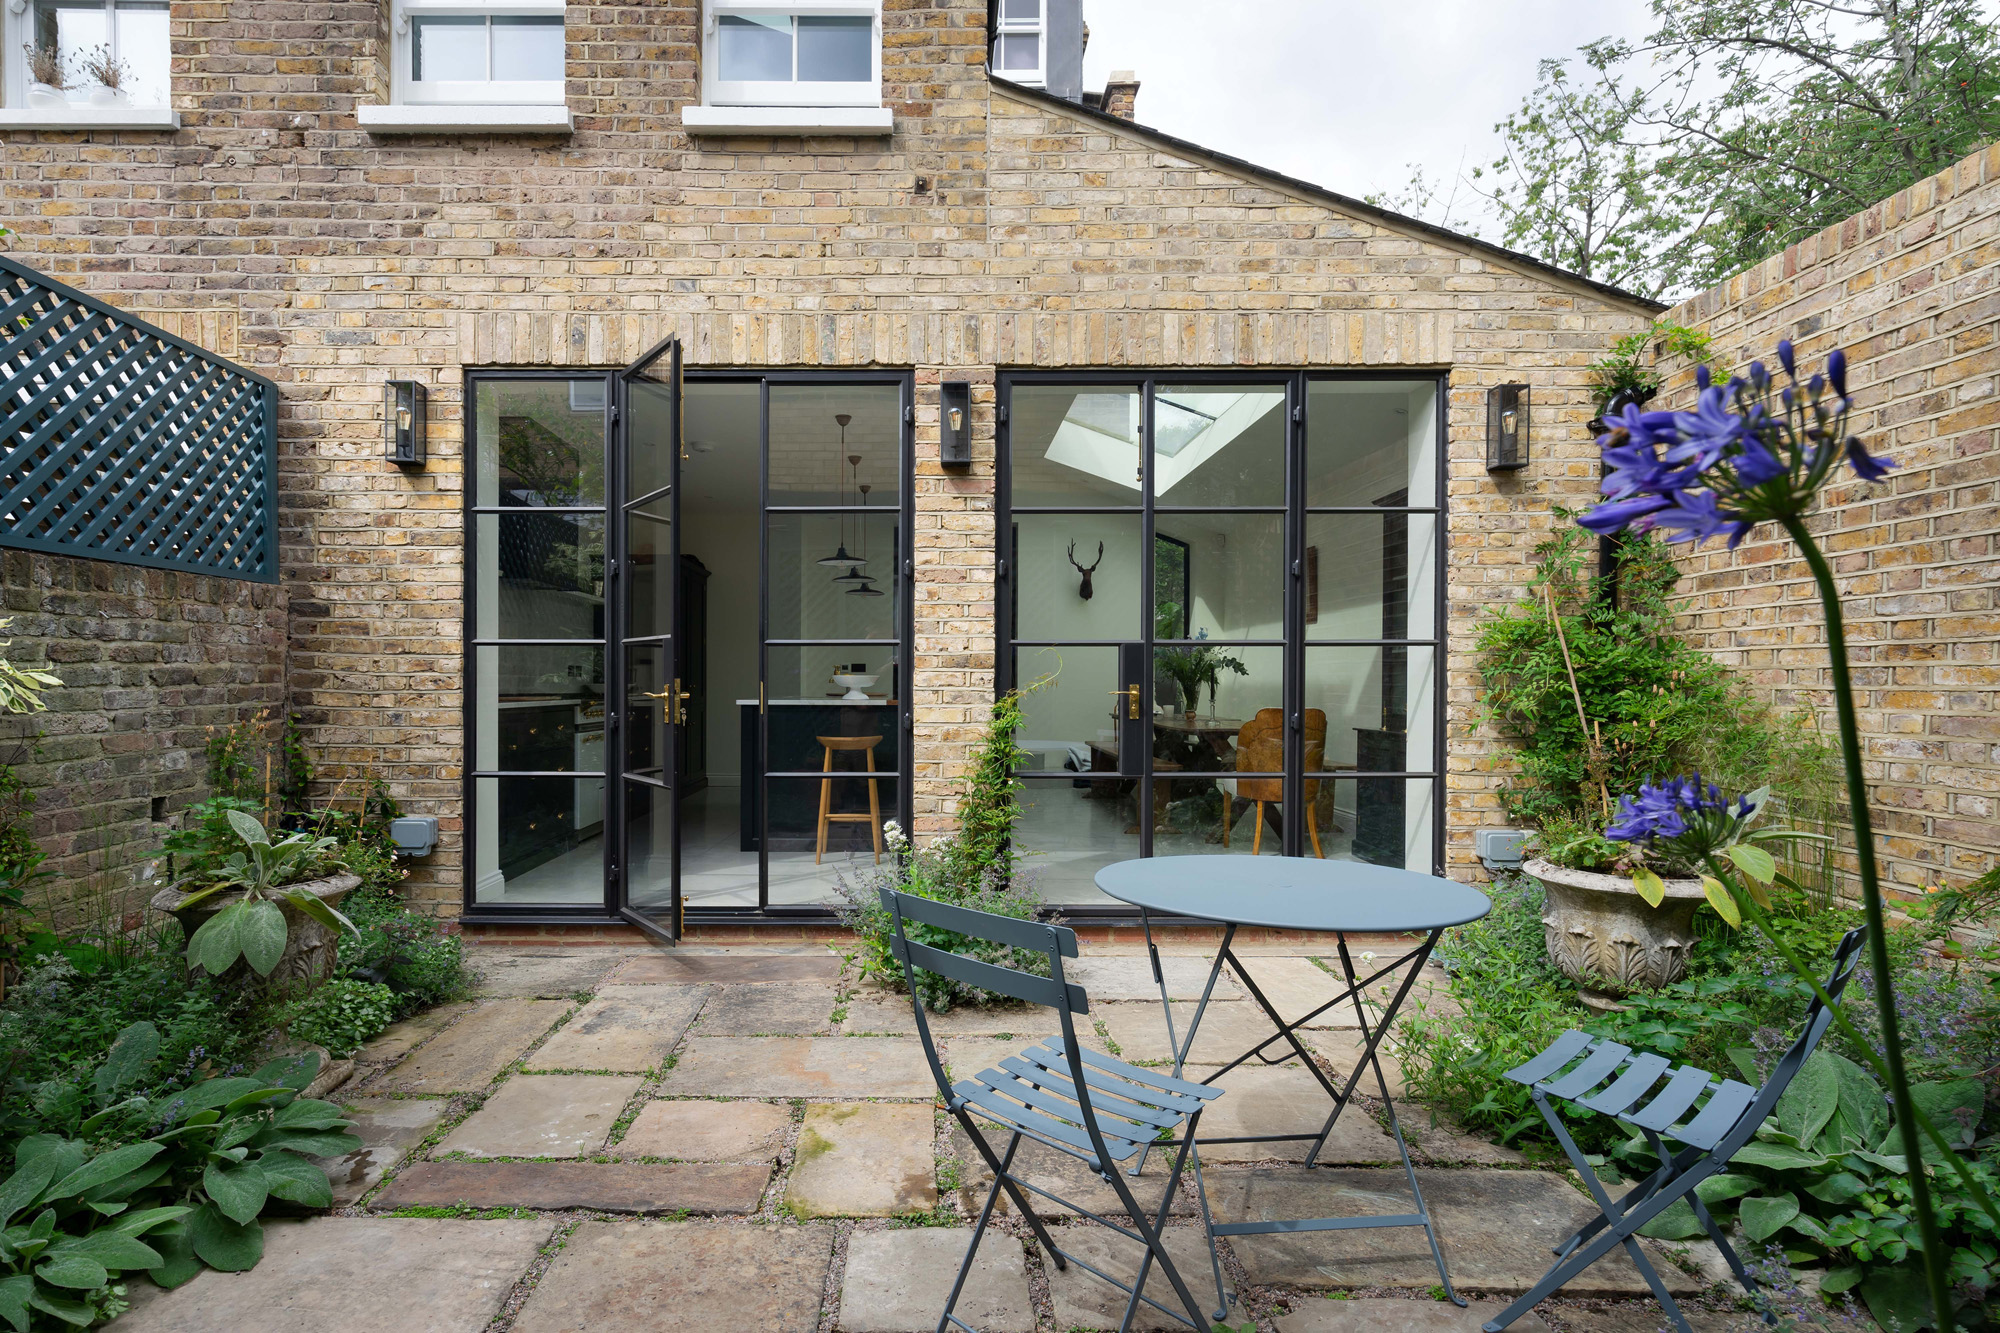 For Rent: Treadgold Street Notting Hill W11 rear façade with patio and Crittall windows